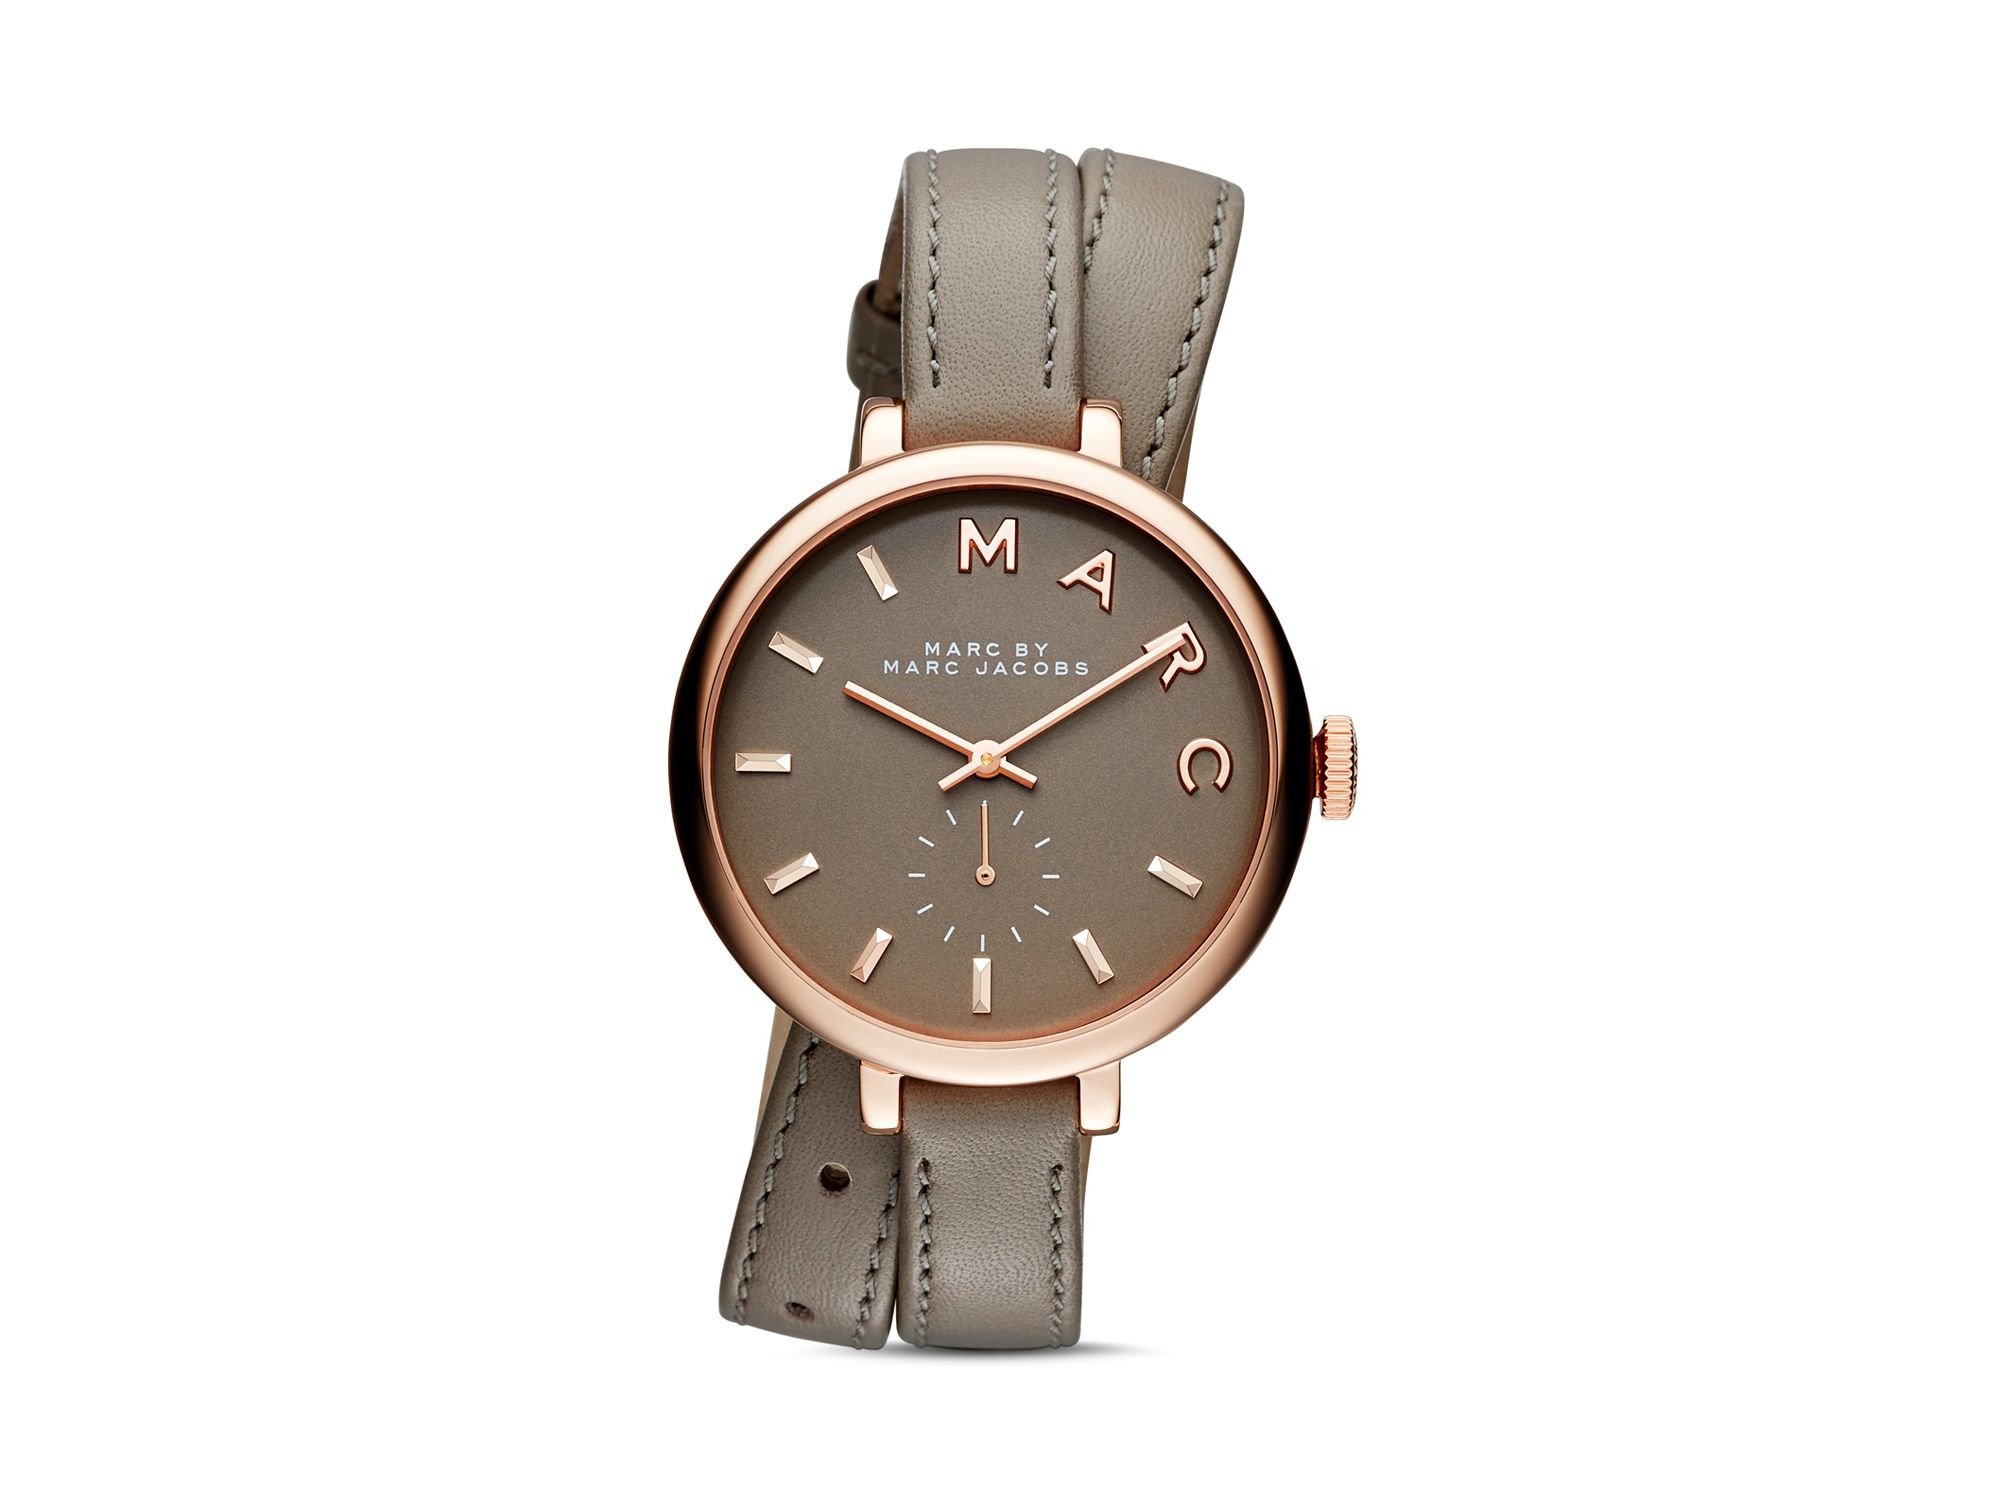 Lyst - Marc jacobs Marc By Sally Leather Strap Wrap Watch, 36mm - 100% ...